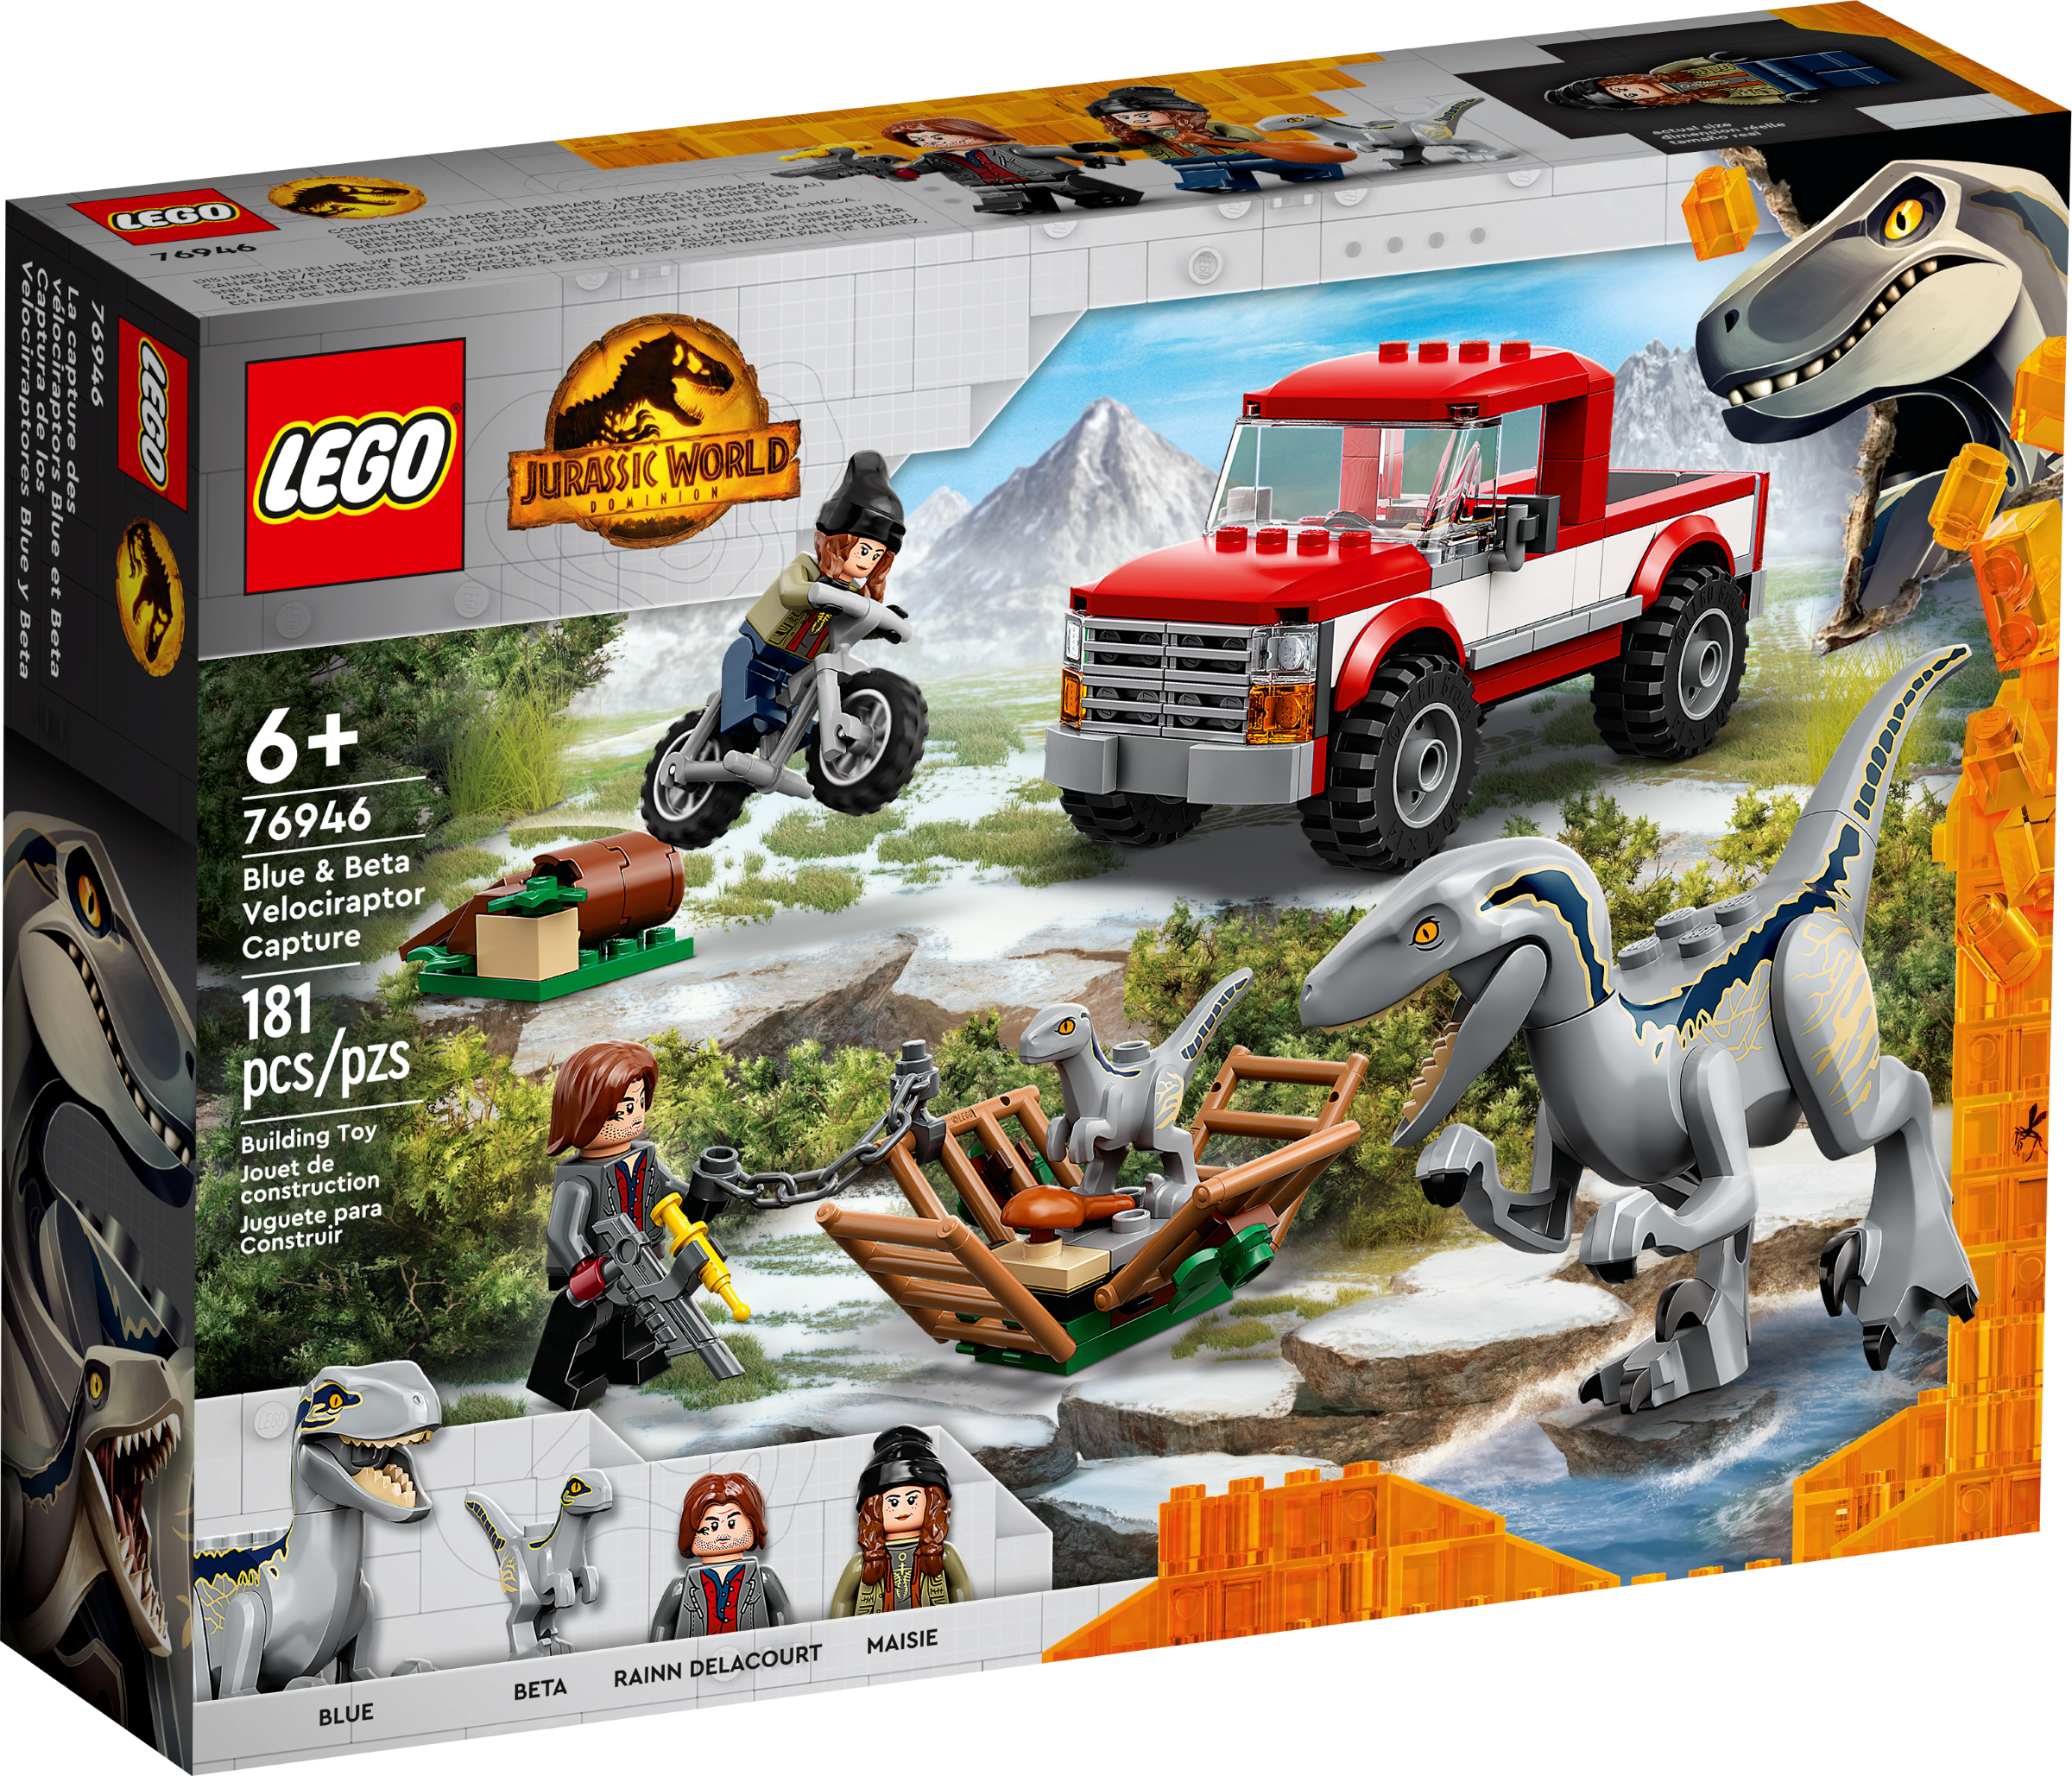 is genoeg Bijlage spreken Jurassic Park Toys and Gifts | Official LEGO® Shop US